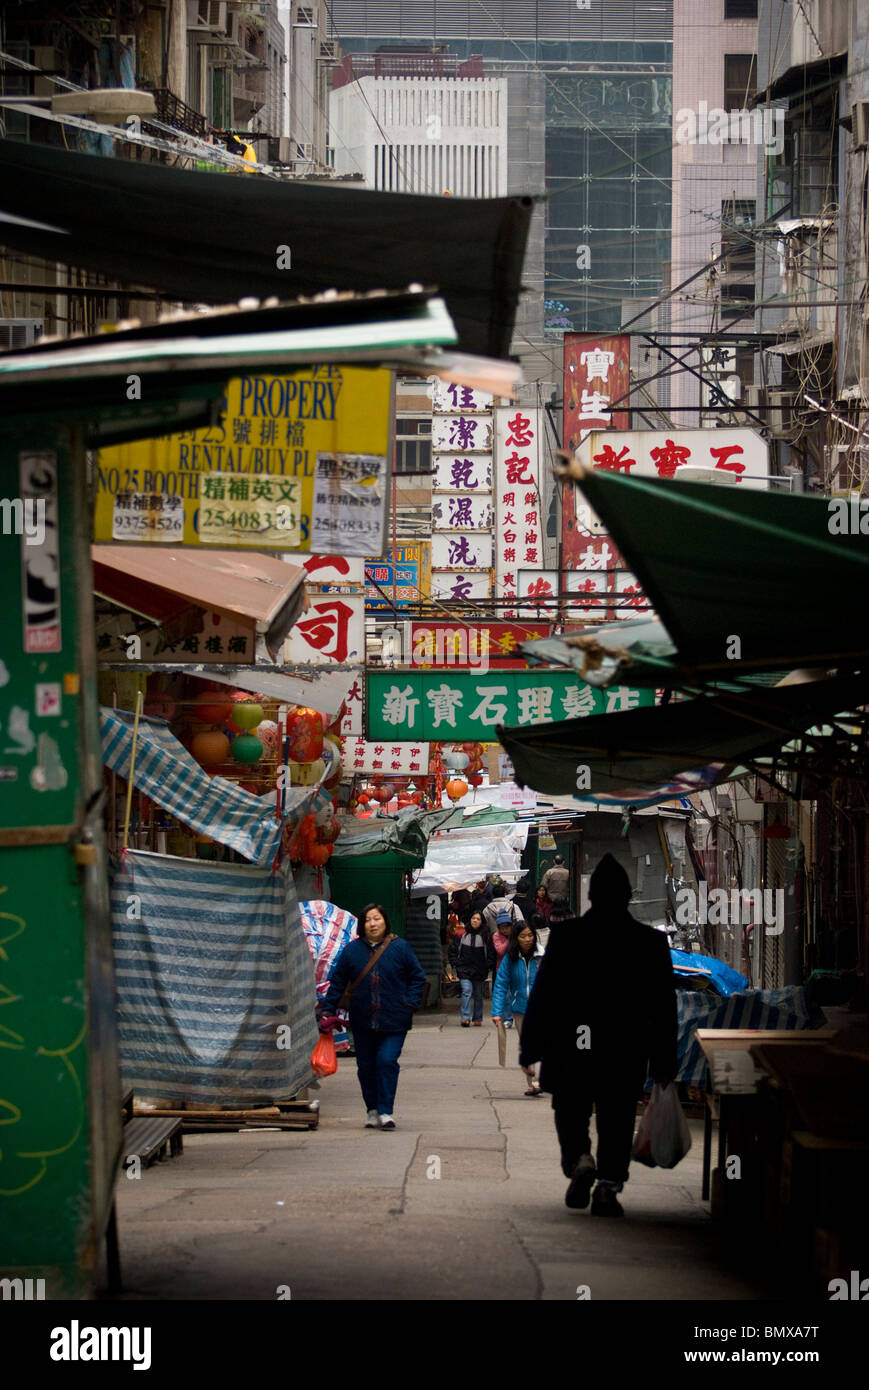 In the Hong Kong Central district there are many wet markets and shopping streets that typify the frenetic nature of the city. Stock Photo